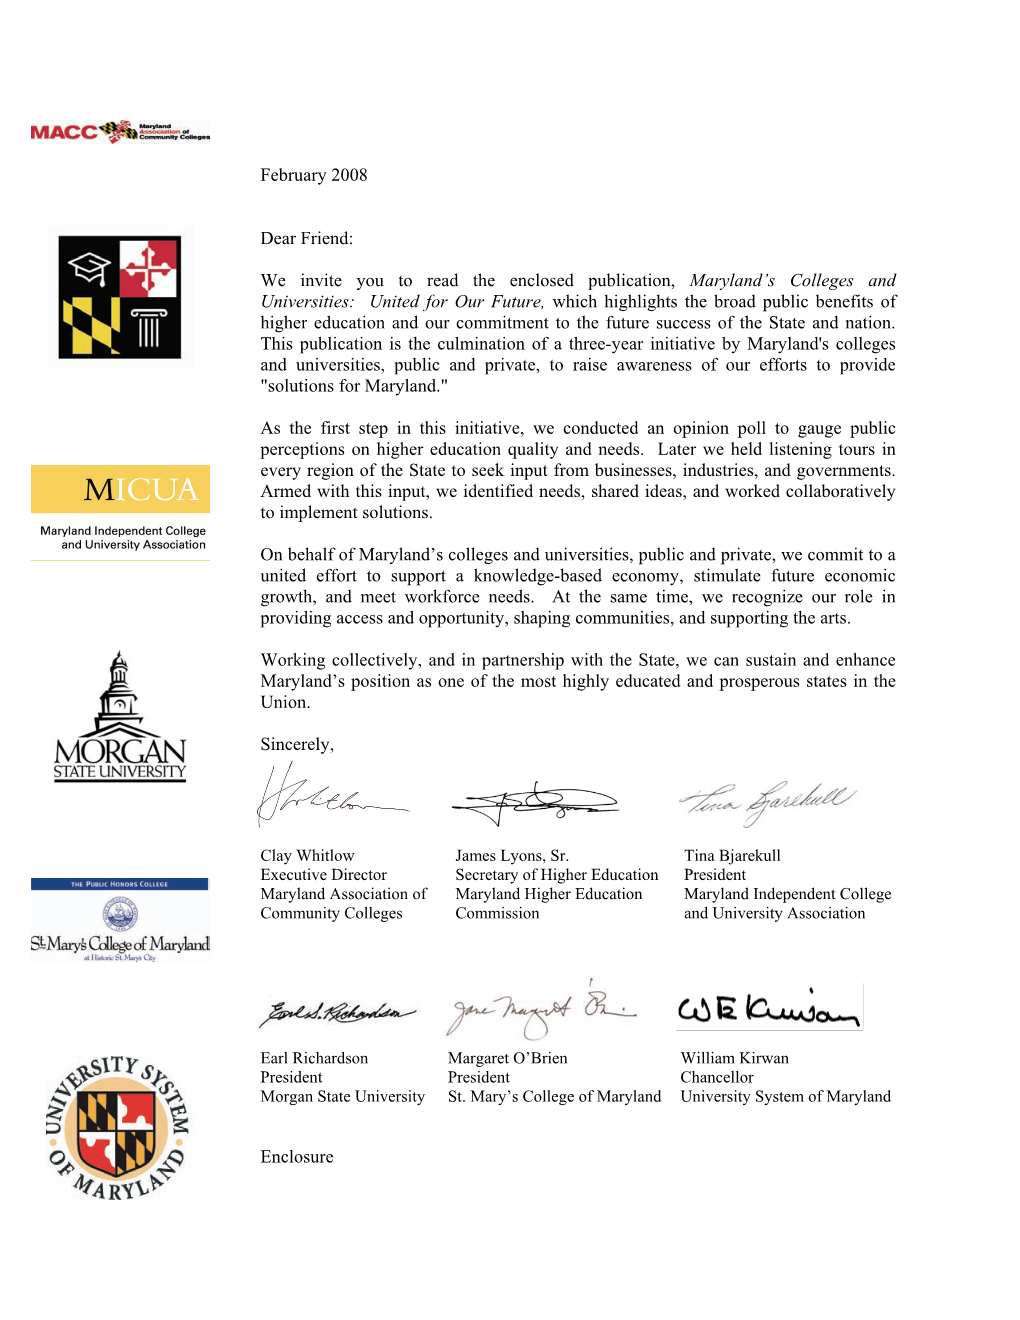 Maryland's Colleges and Universities, Public and Private, to Raise Awareness of Our Efforts to Provide "Solutions for Maryland."